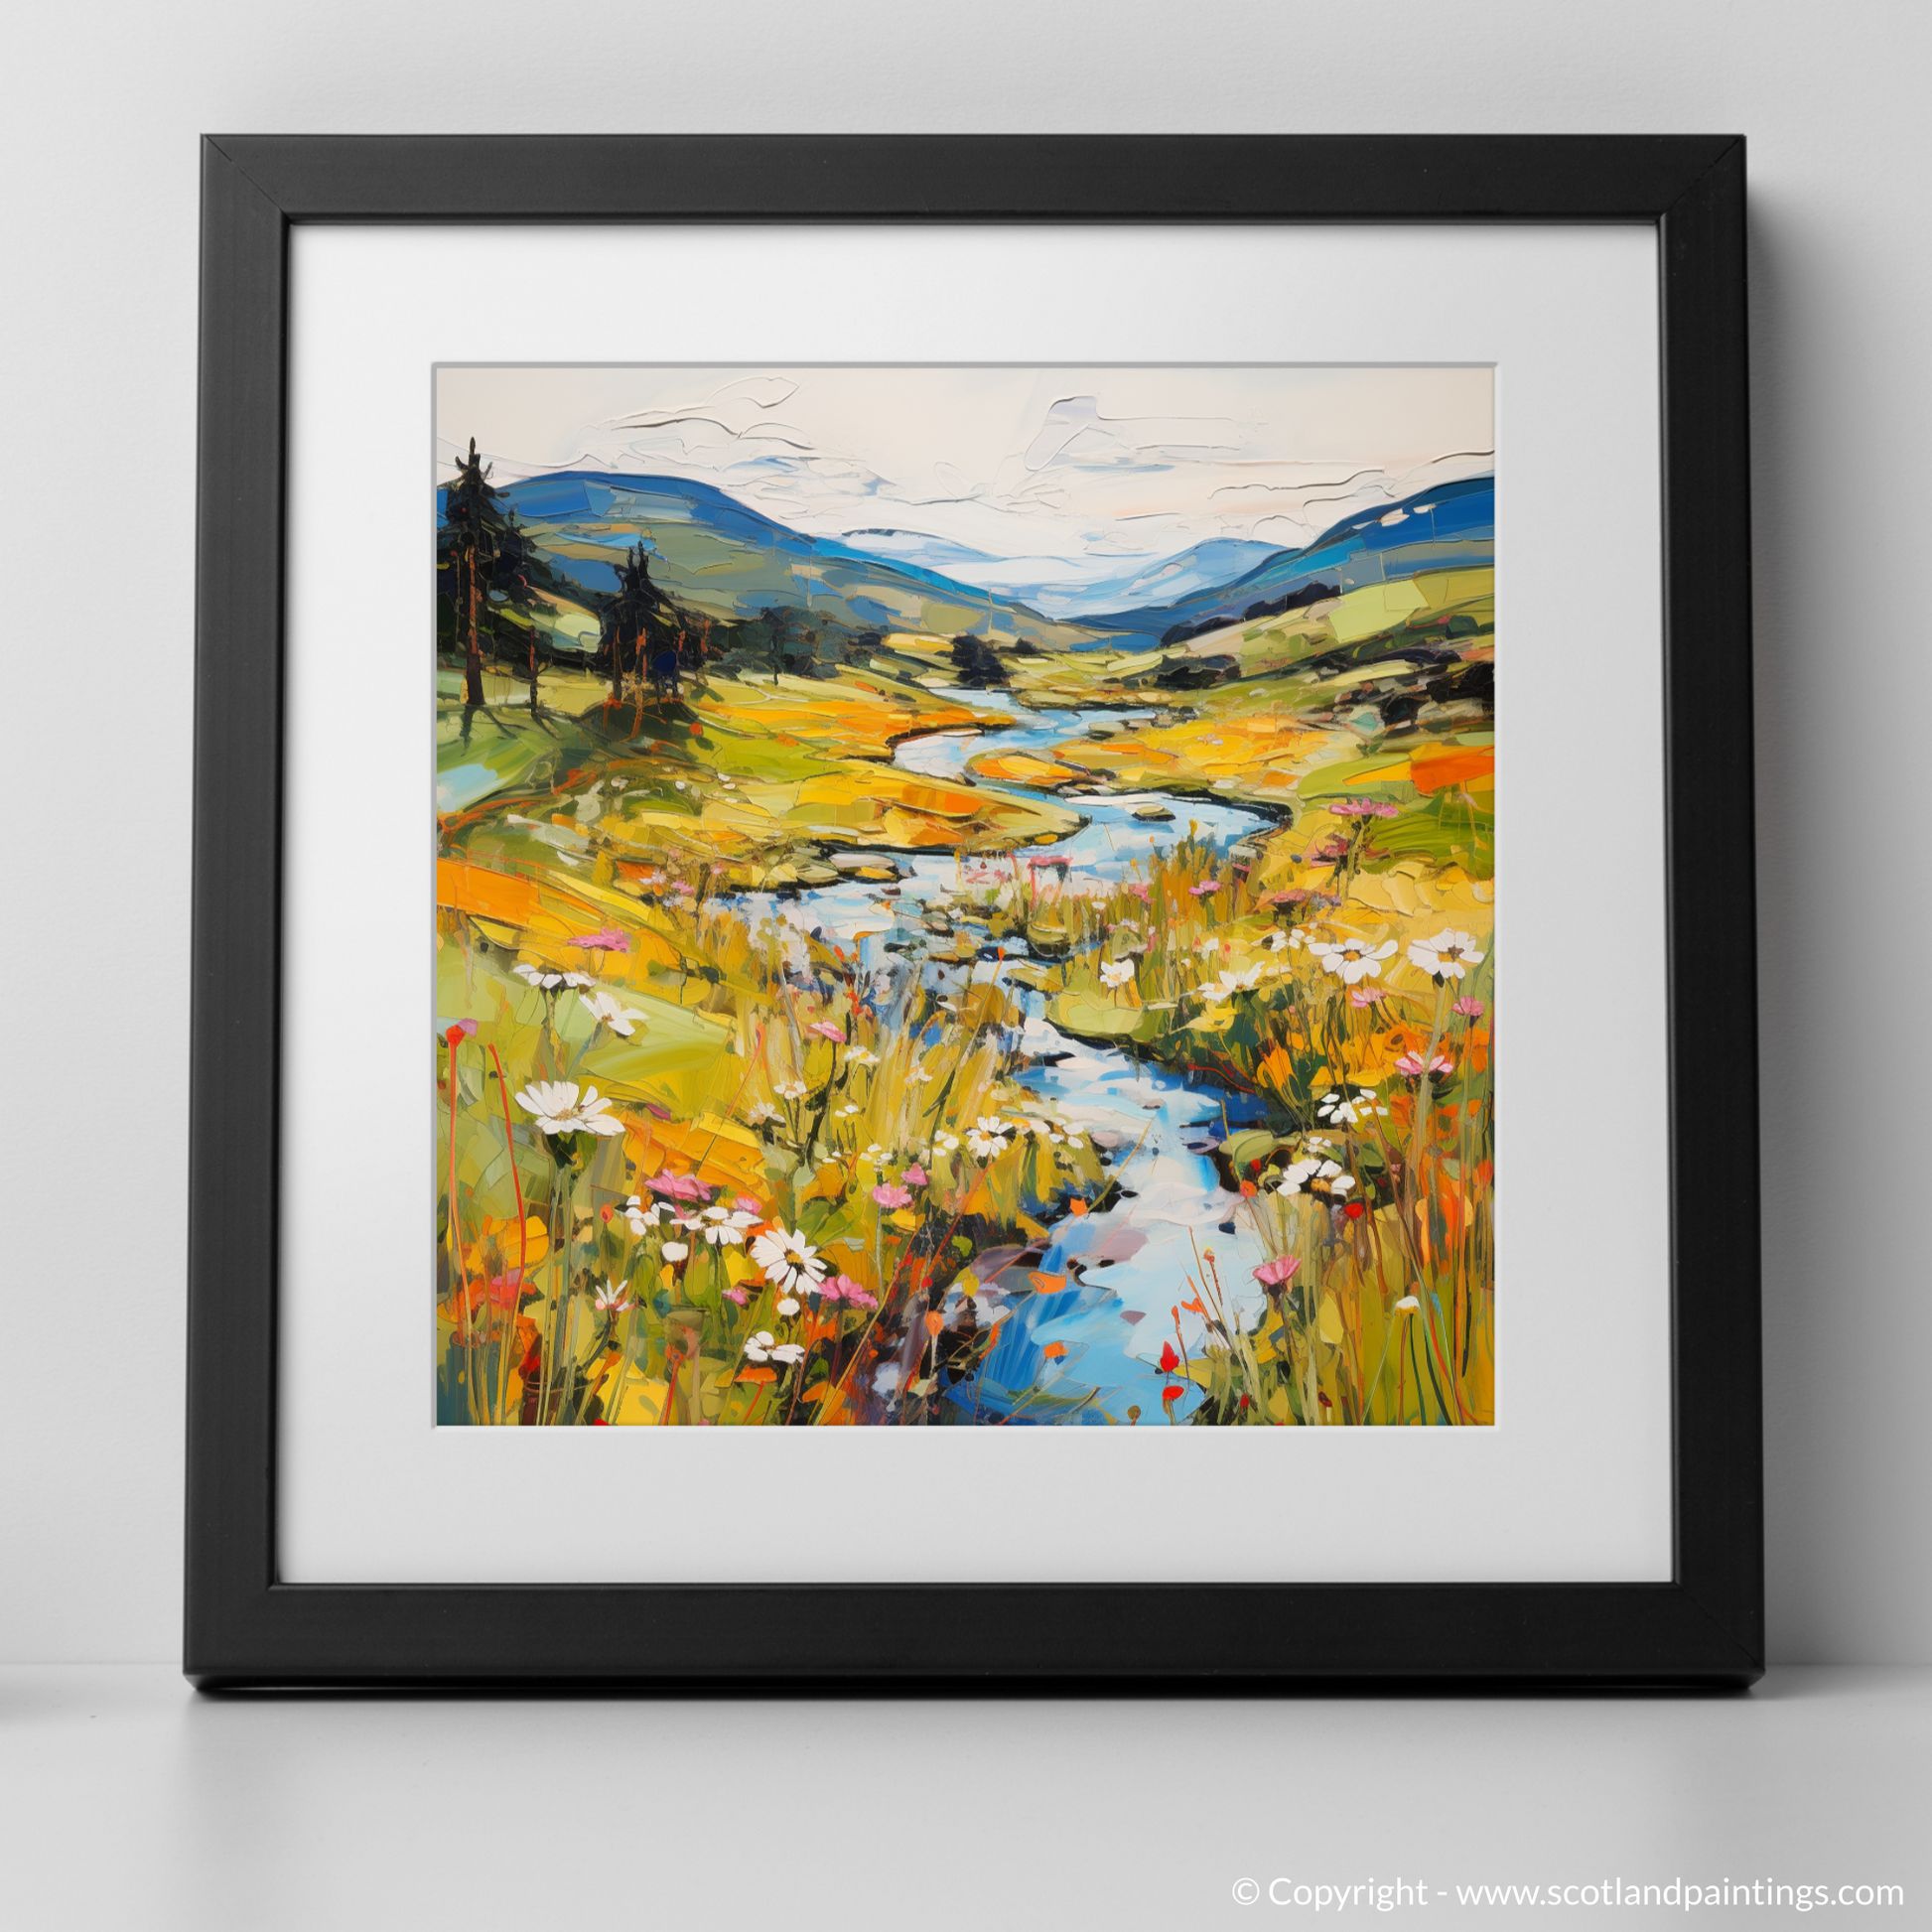 Art Print of Glen Rosa, Isle of Arran in summer with a black frame